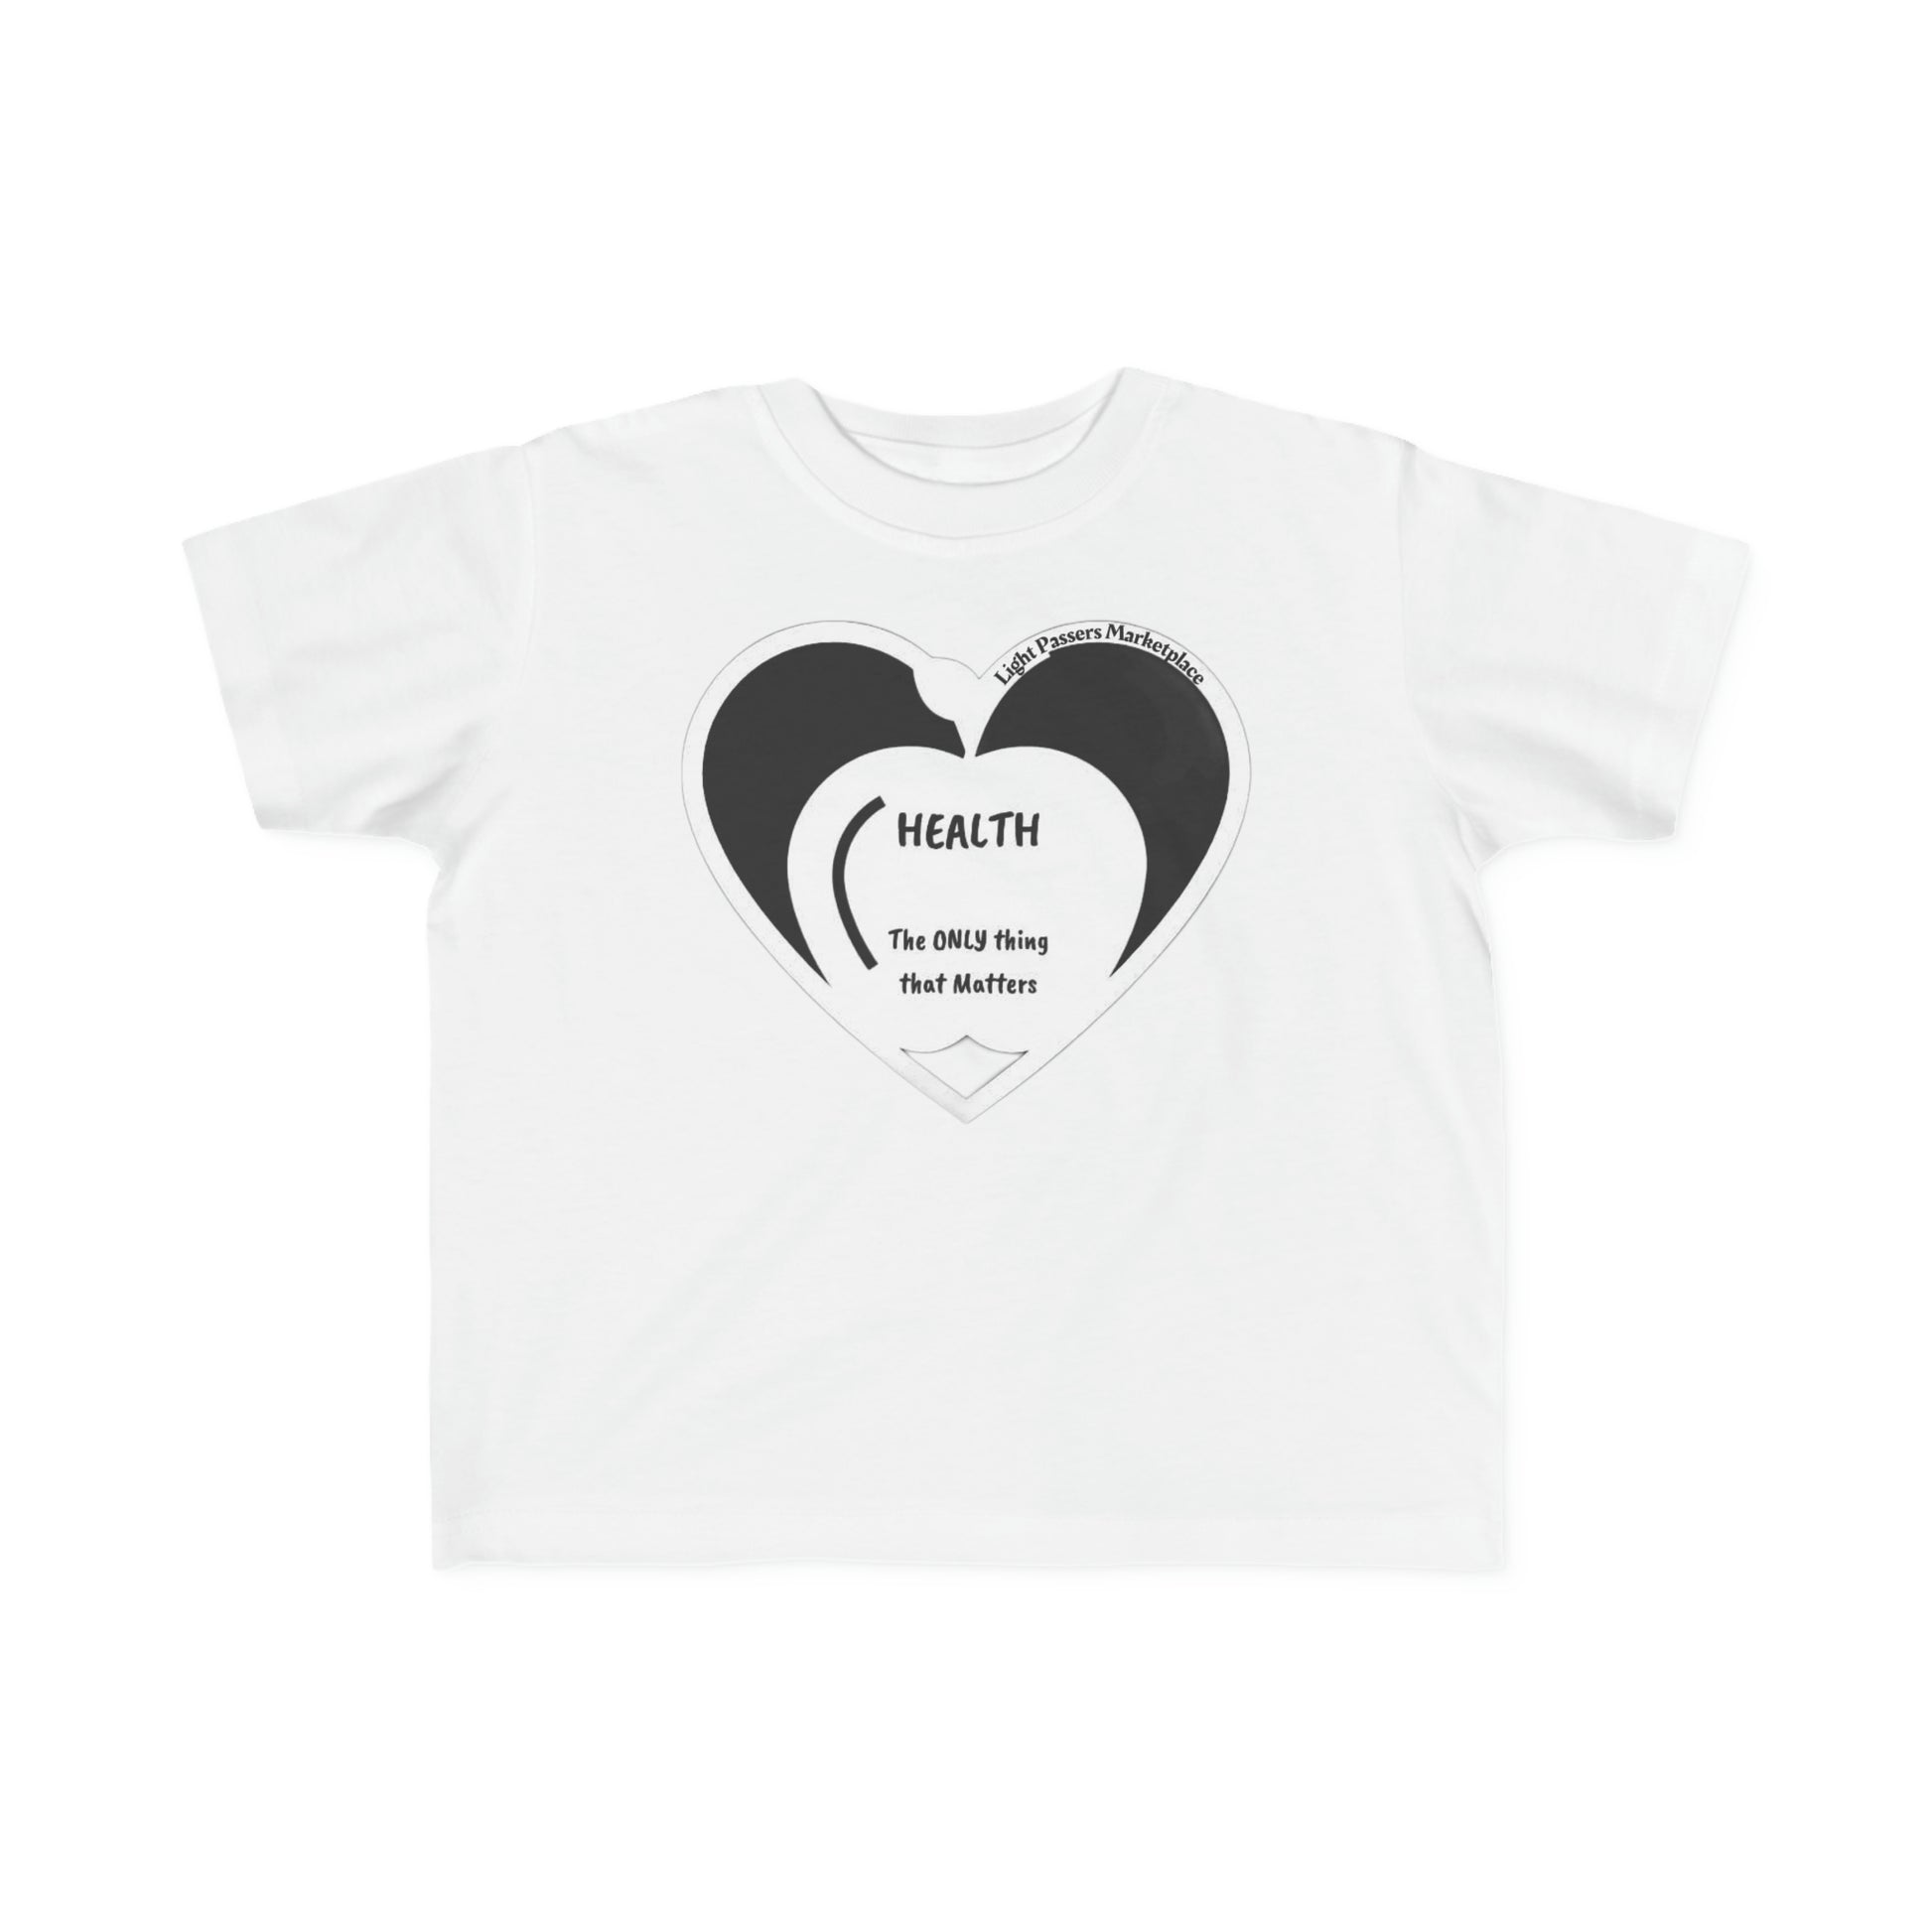 A white toddler t-shirt featuring a heart design and text, made of soft 100% combed cotton. Durable print, light fabric, tear-away label, classic fit, true to size.